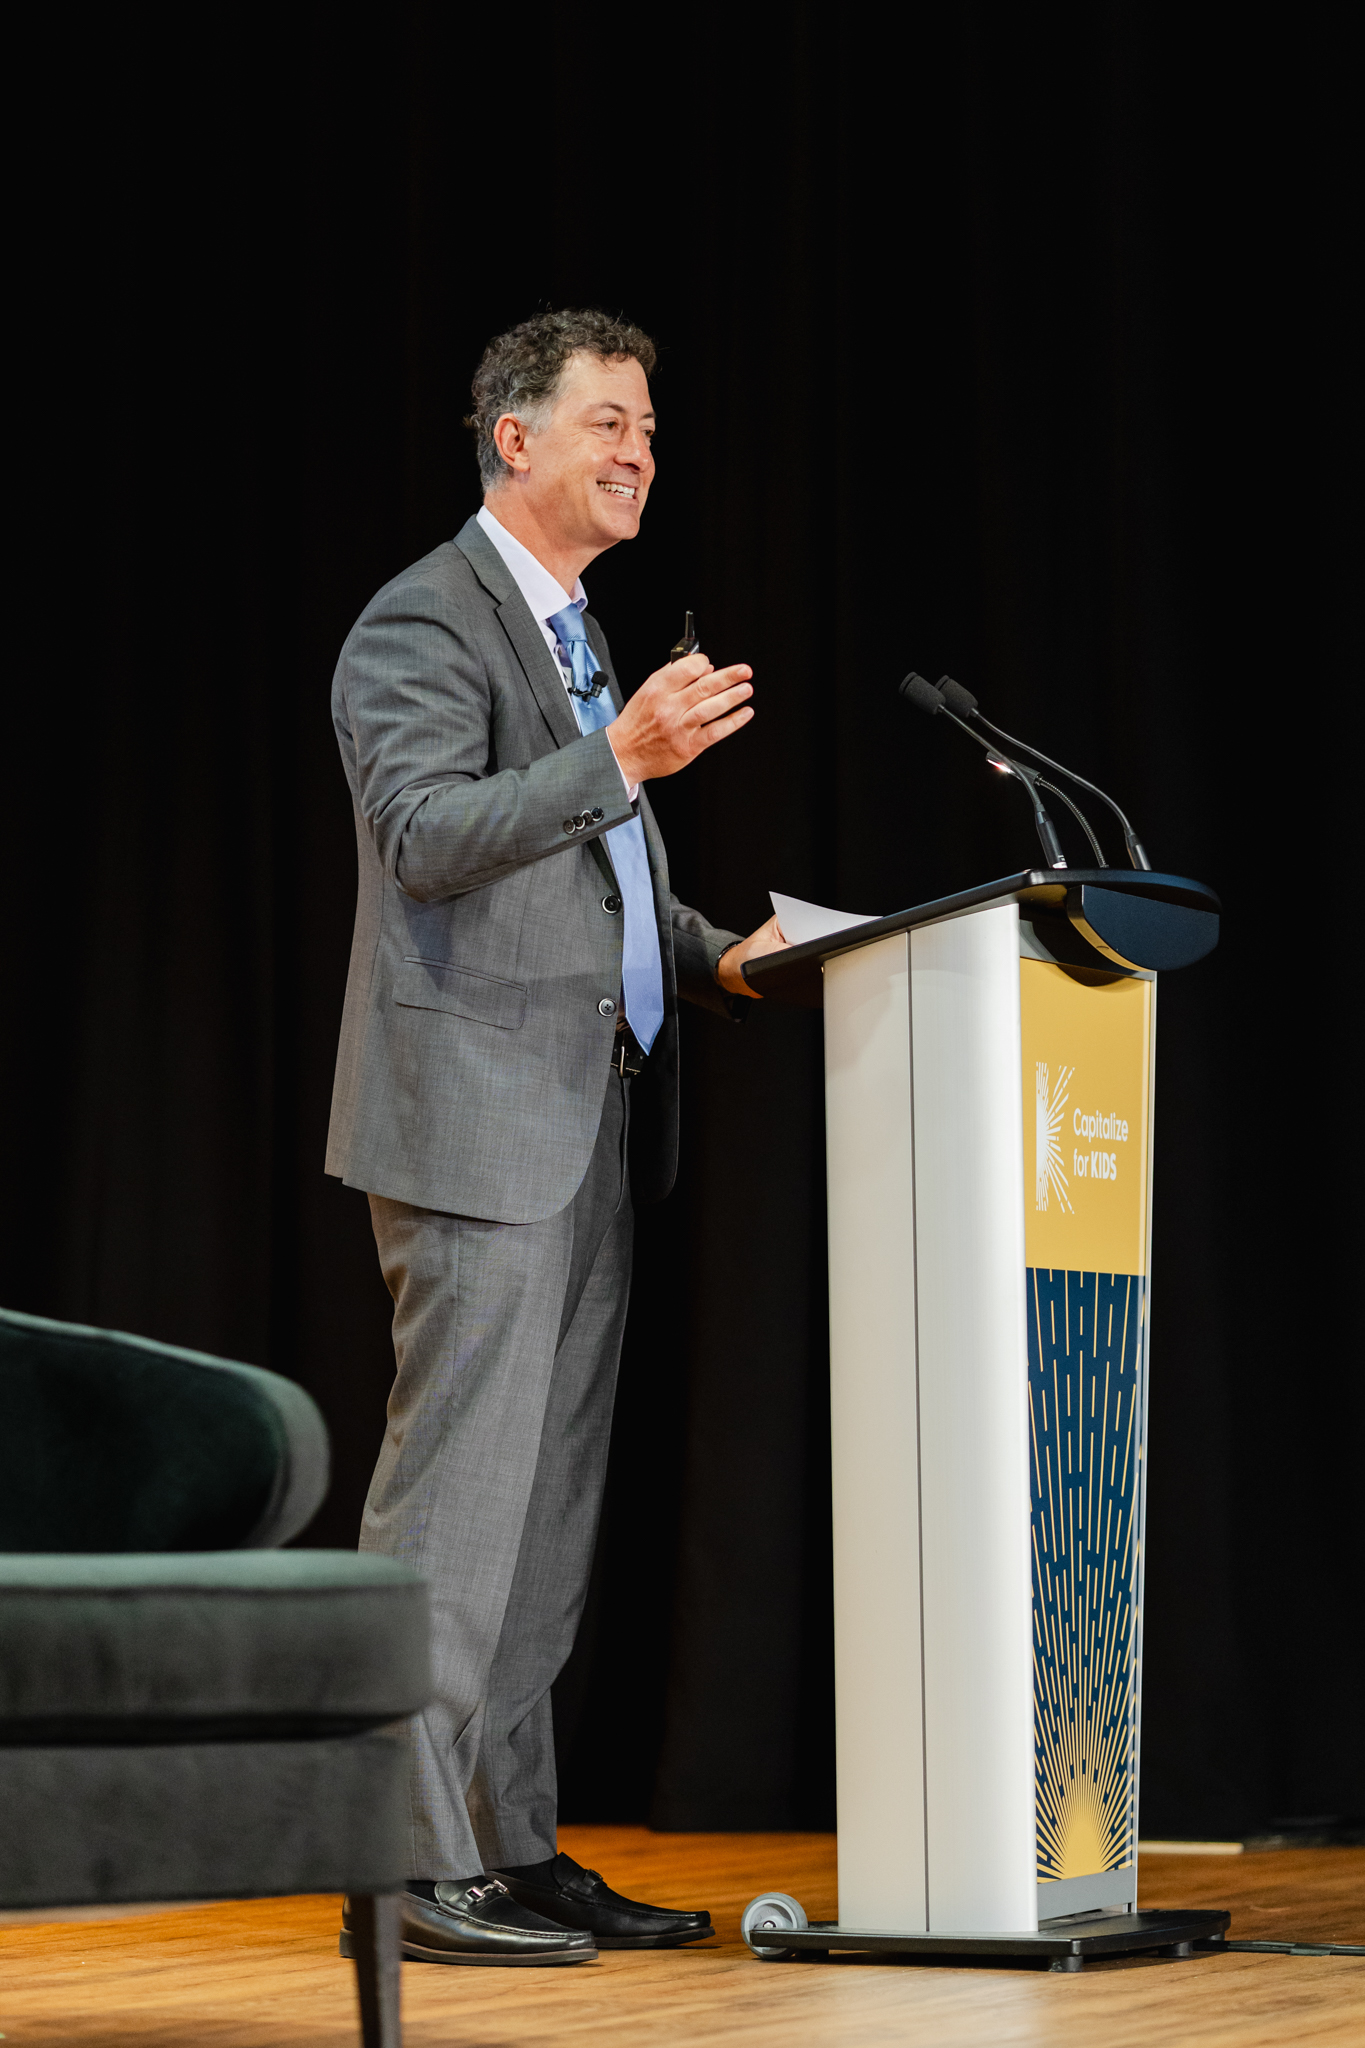 A man in a suit standing at a podium delivering a conference presentation.